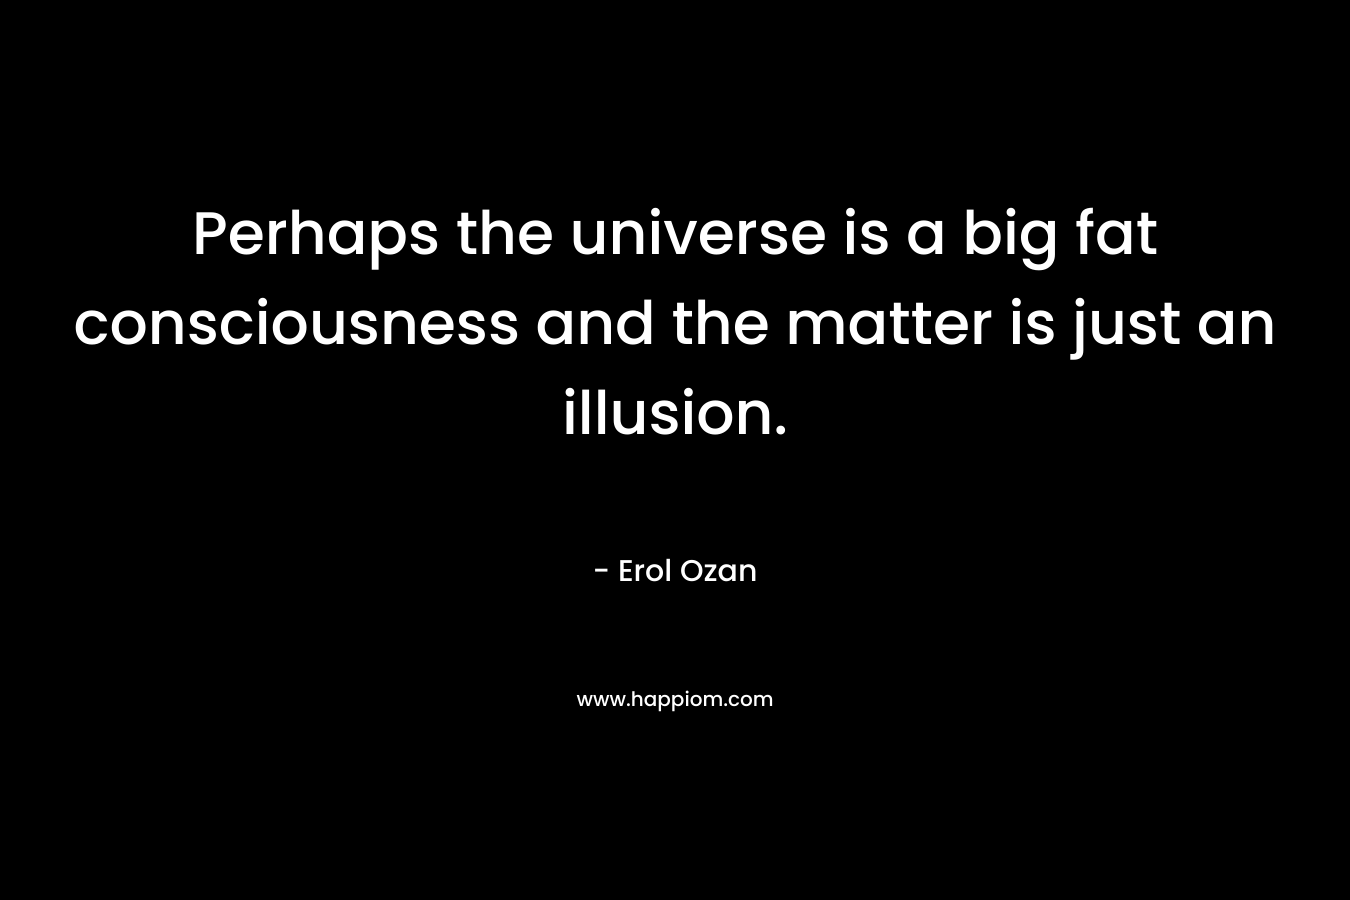 Perhaps the universe is a big fat consciousness and the matter is just an illusion. – Erol Ozan